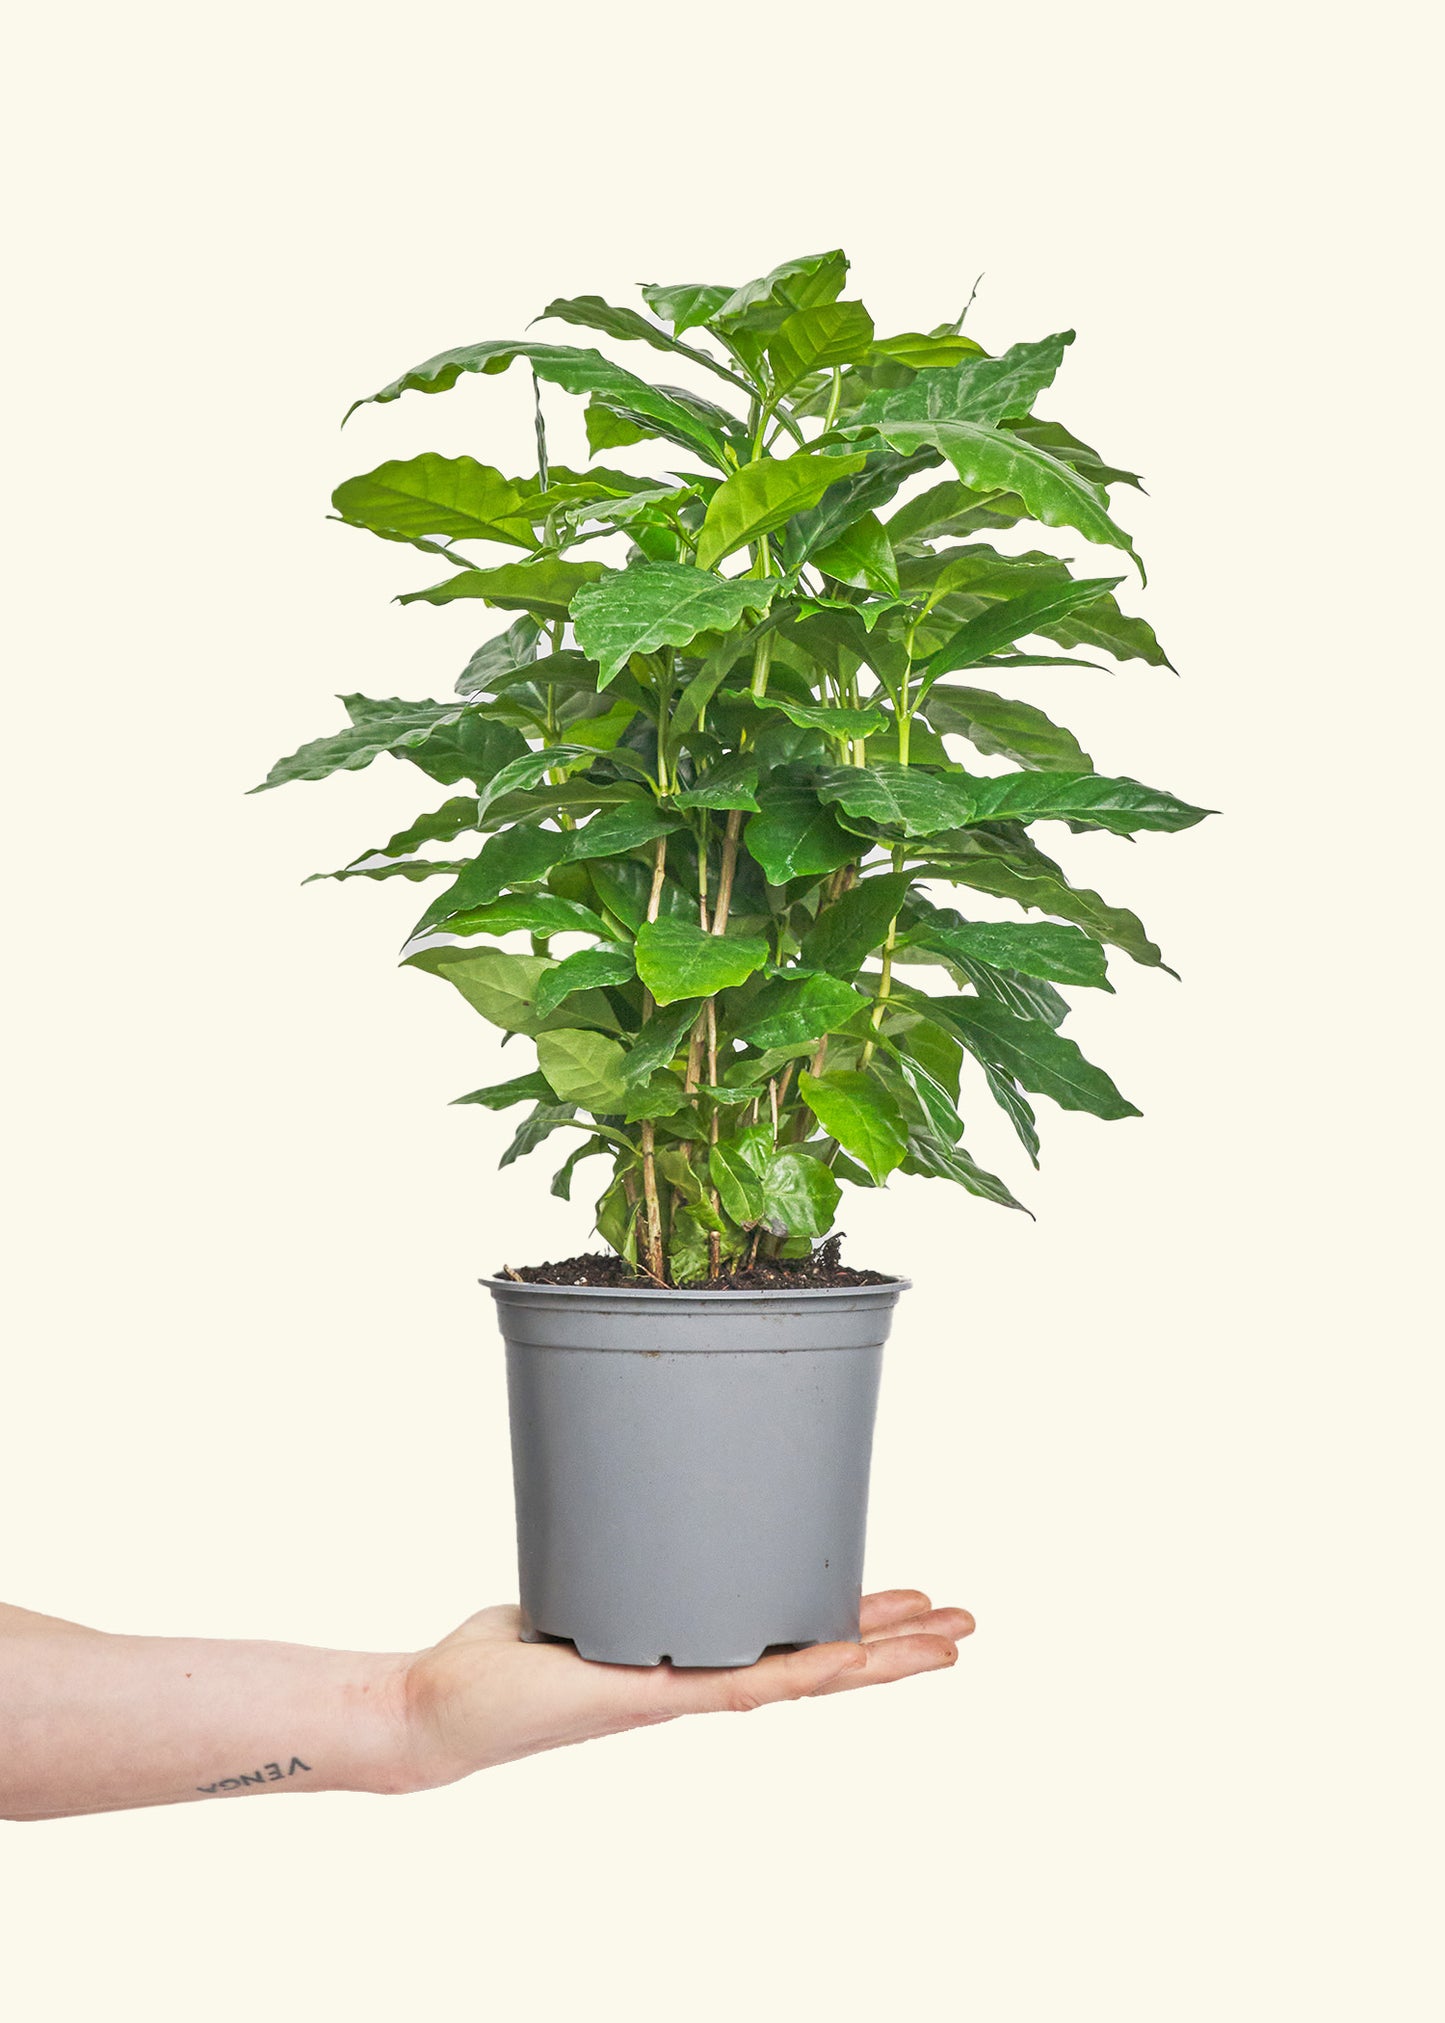 Small Coffee Plant in a 6" grow pot.